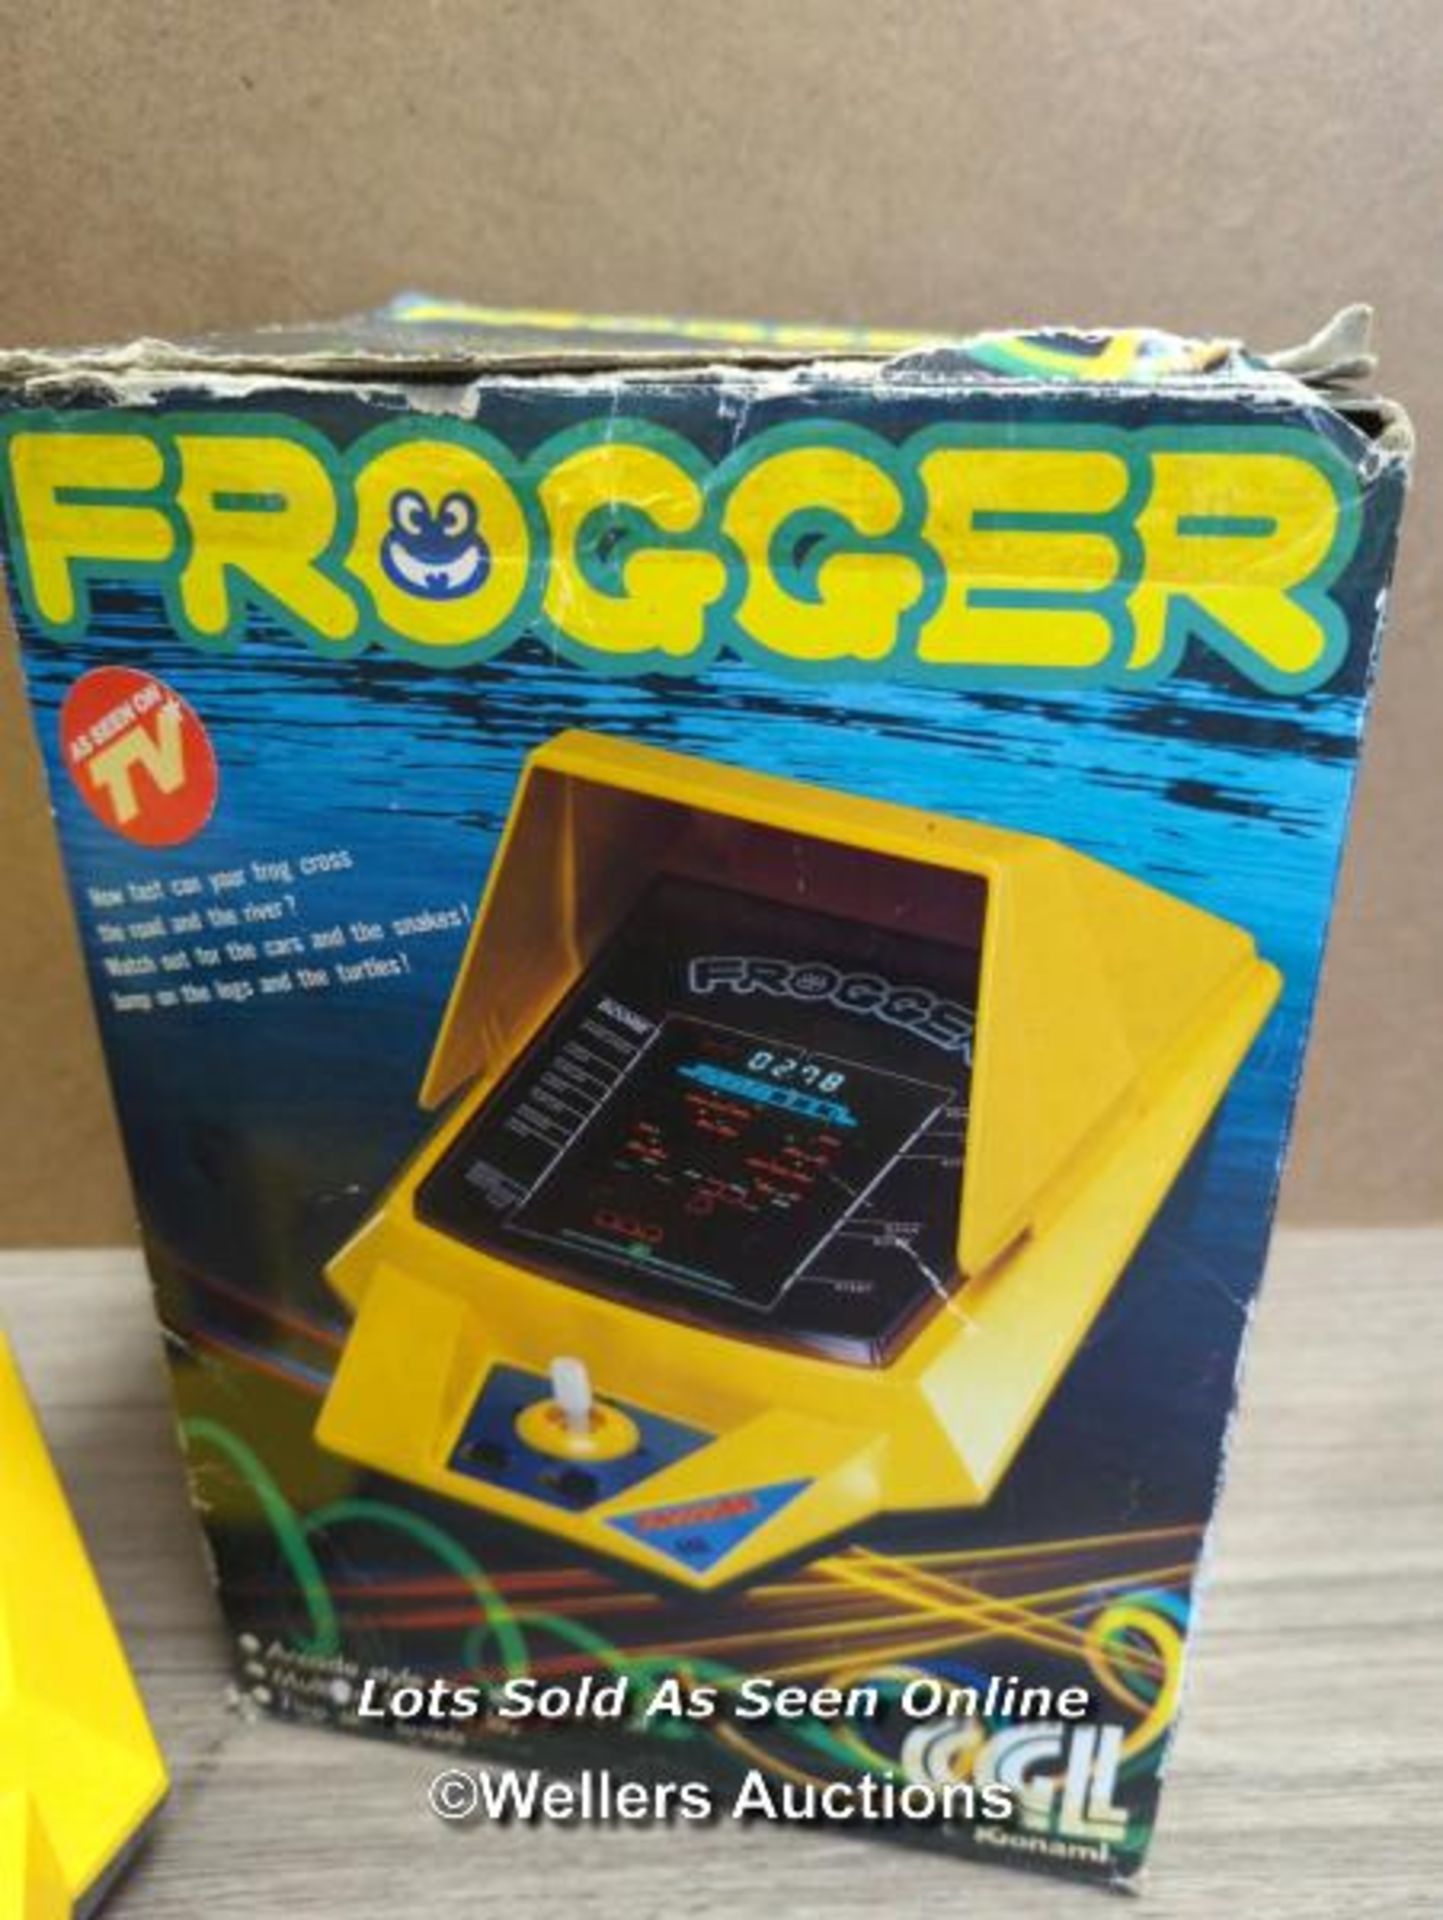 VINTAGE KONAMI FROGGER TABLETOP GAME, WITH ORIGINAL BOX AND PACKING FOAM - Image 2 of 9